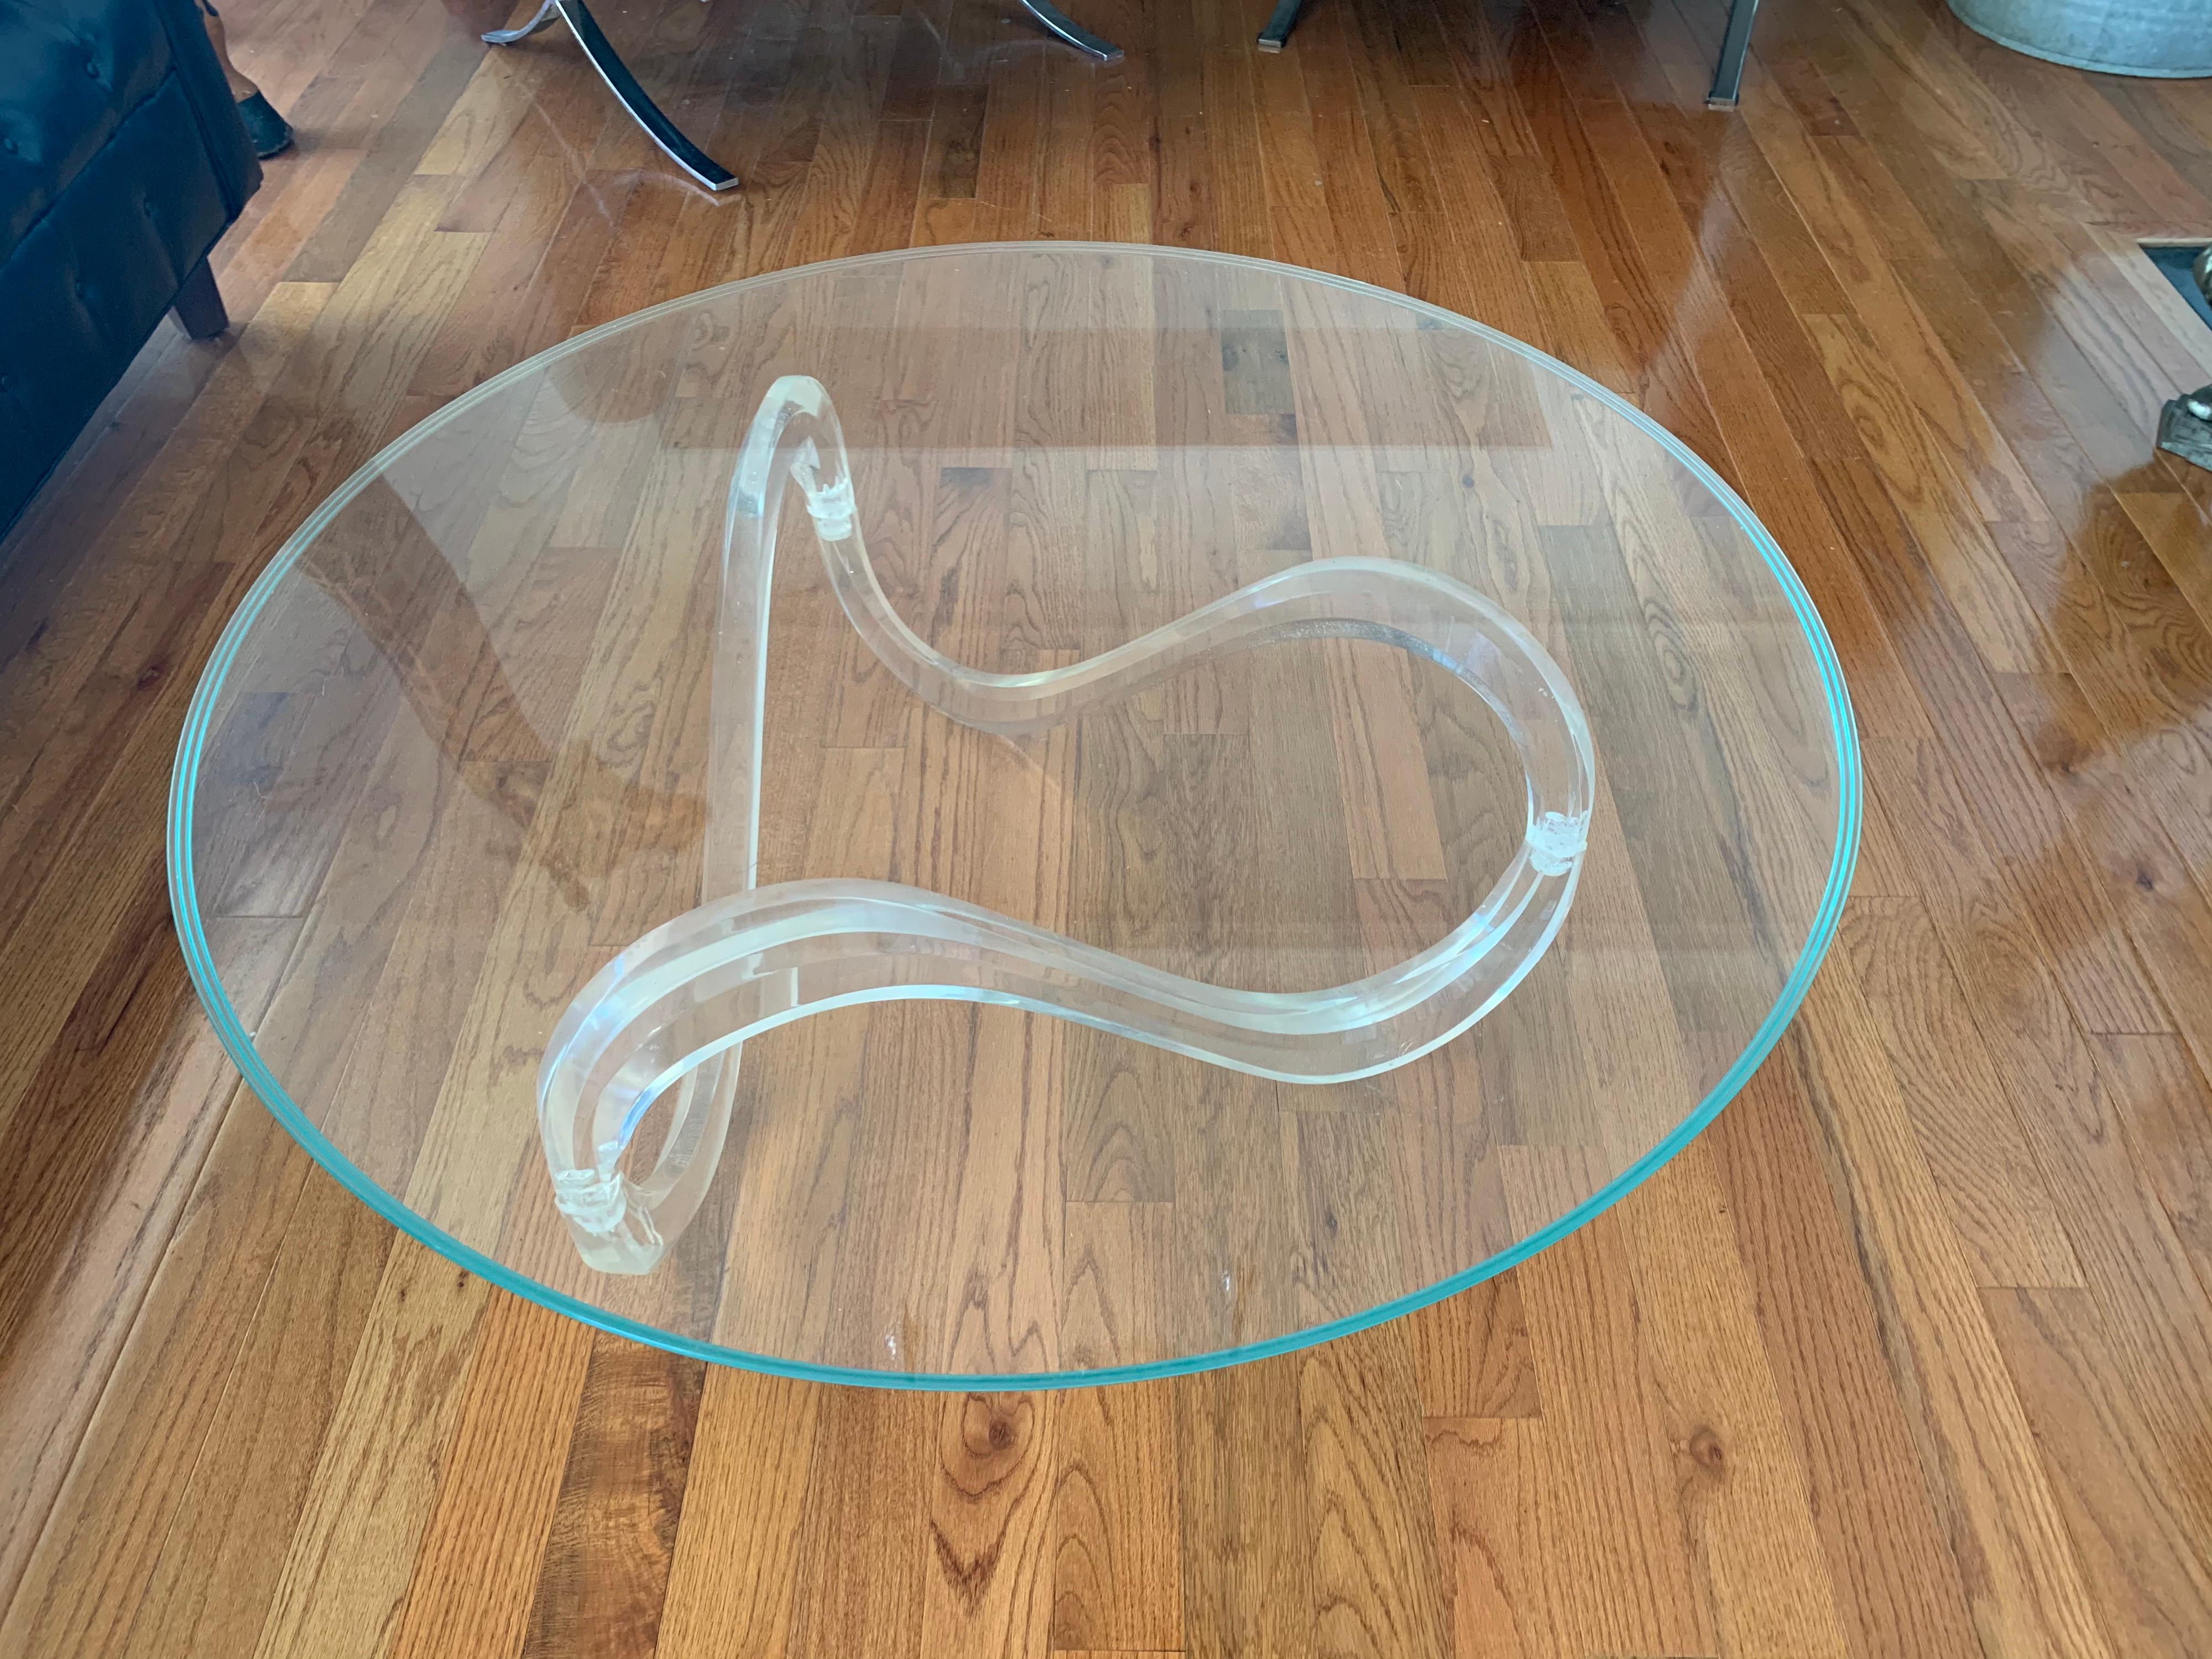 Stunning midcentury cocktail table with heavy, thick glass top and sculptural Lucite base. Great scale and better lines. Now more than ever, home is where the heart is.